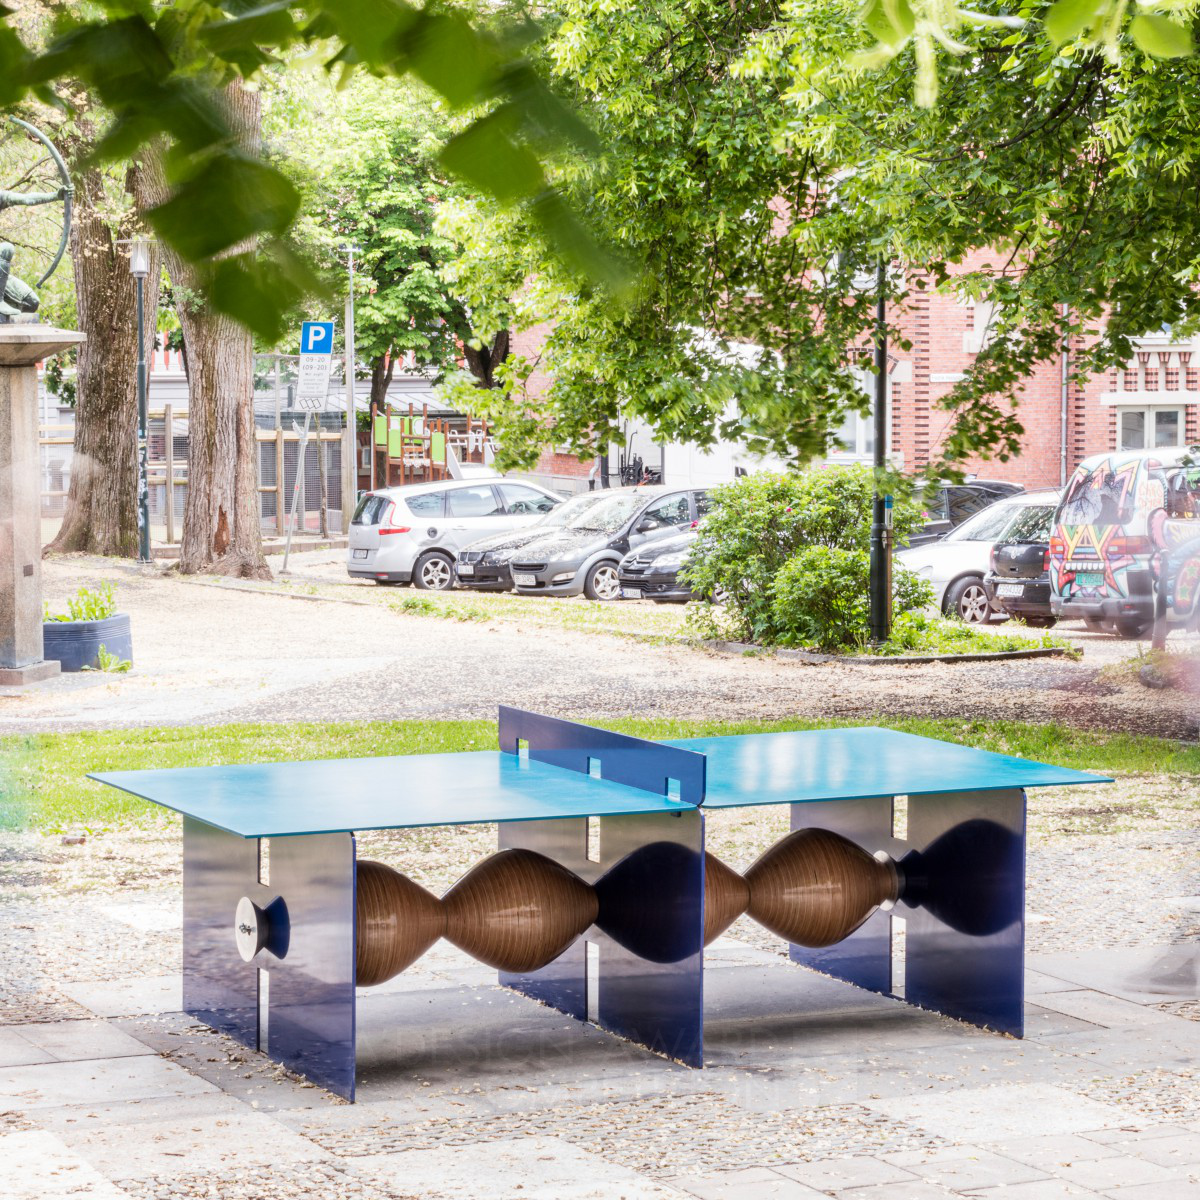 Torgeir Stige wins Silver at the prestigious A' Street and City Furniture Design Award with Sandane Ping Pong Table.